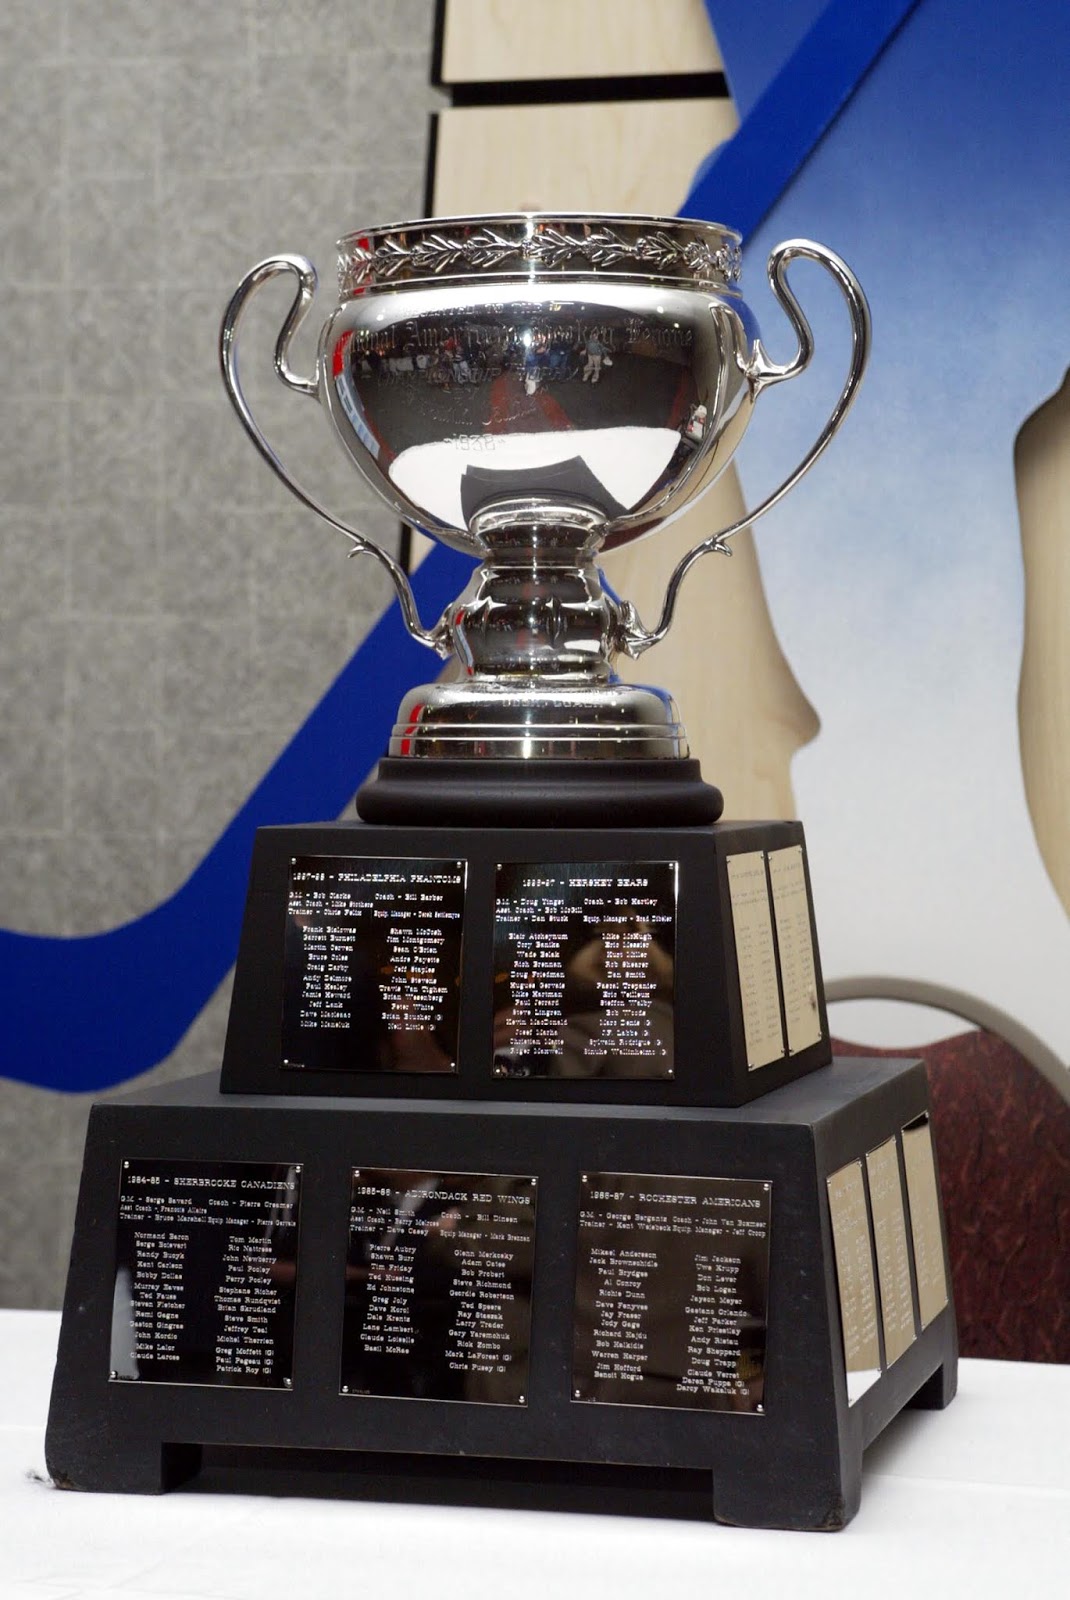 Where is the Calder Cup The Rest of the Year?